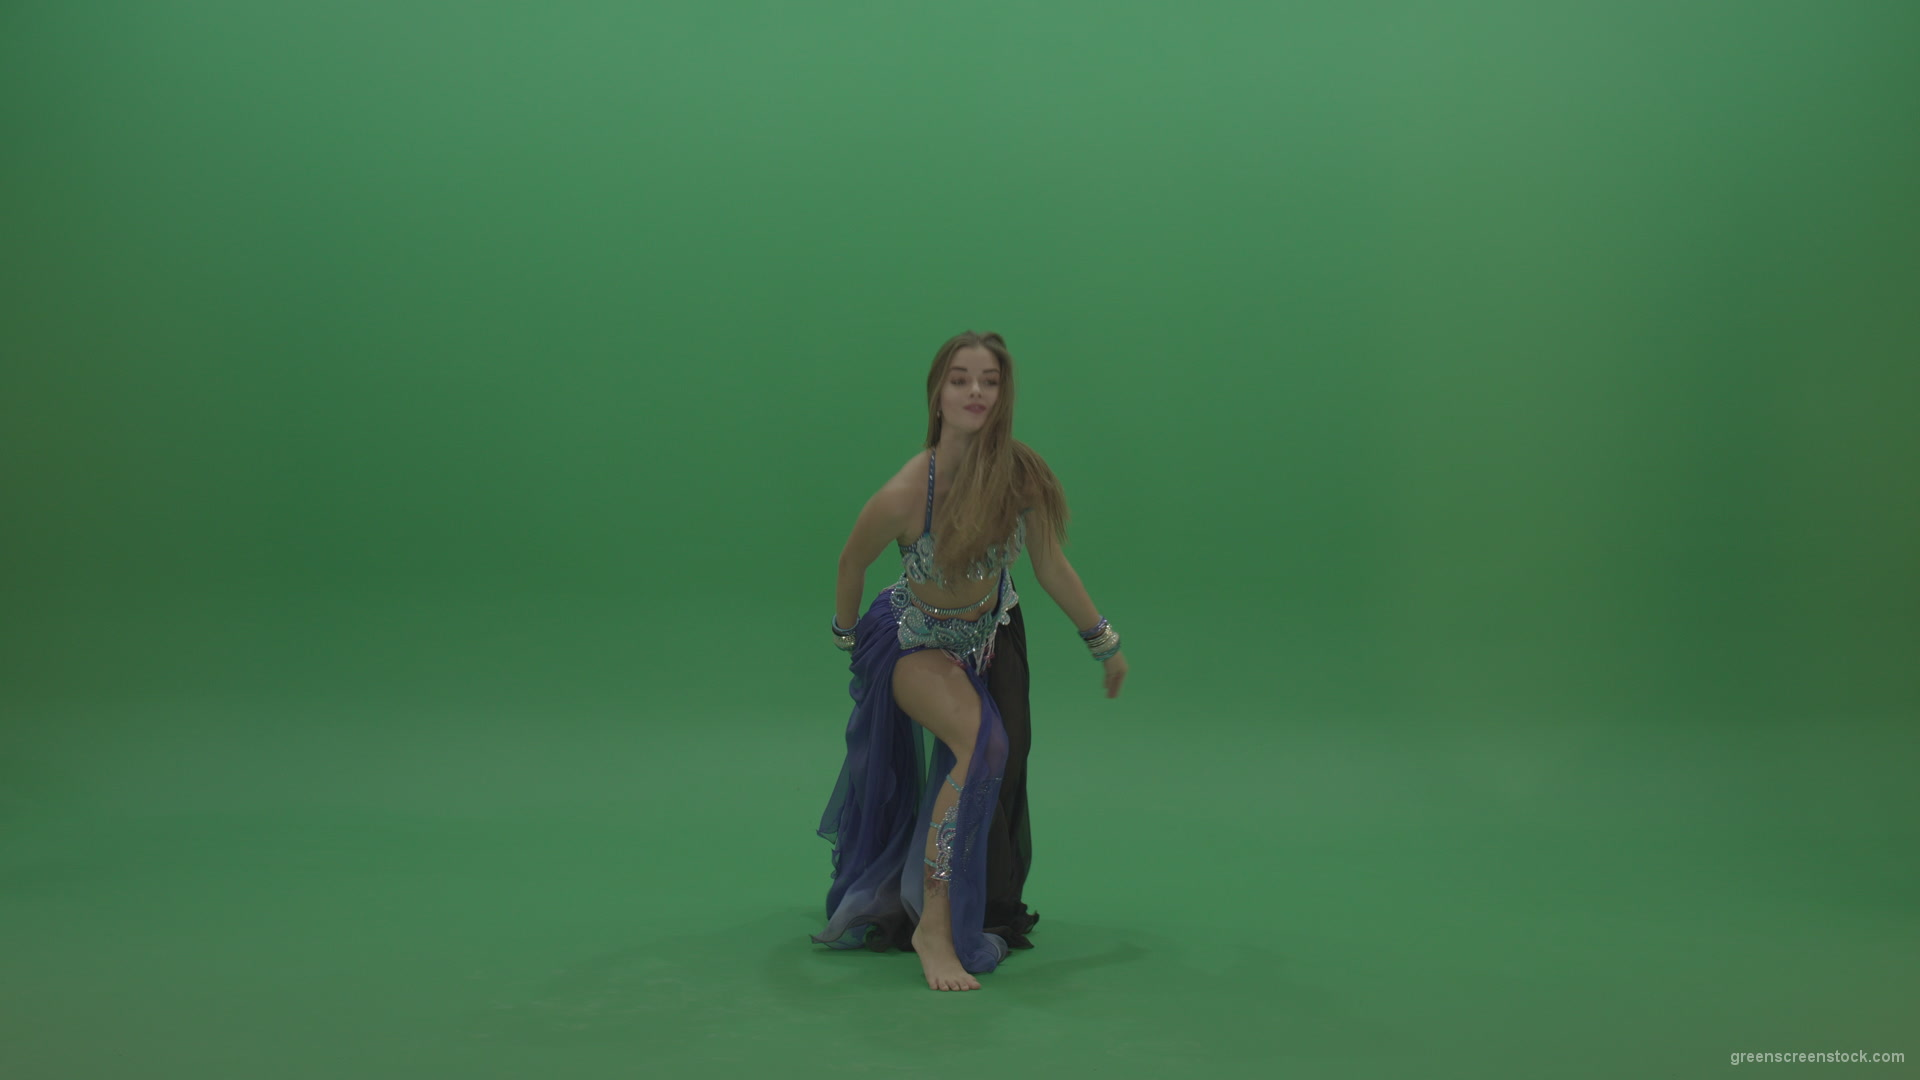 Splendid-belly-dancer-in-purple-and-black-wear-display-amazing-dance-moves-over-chromakey-background_008 Green Screen Stock